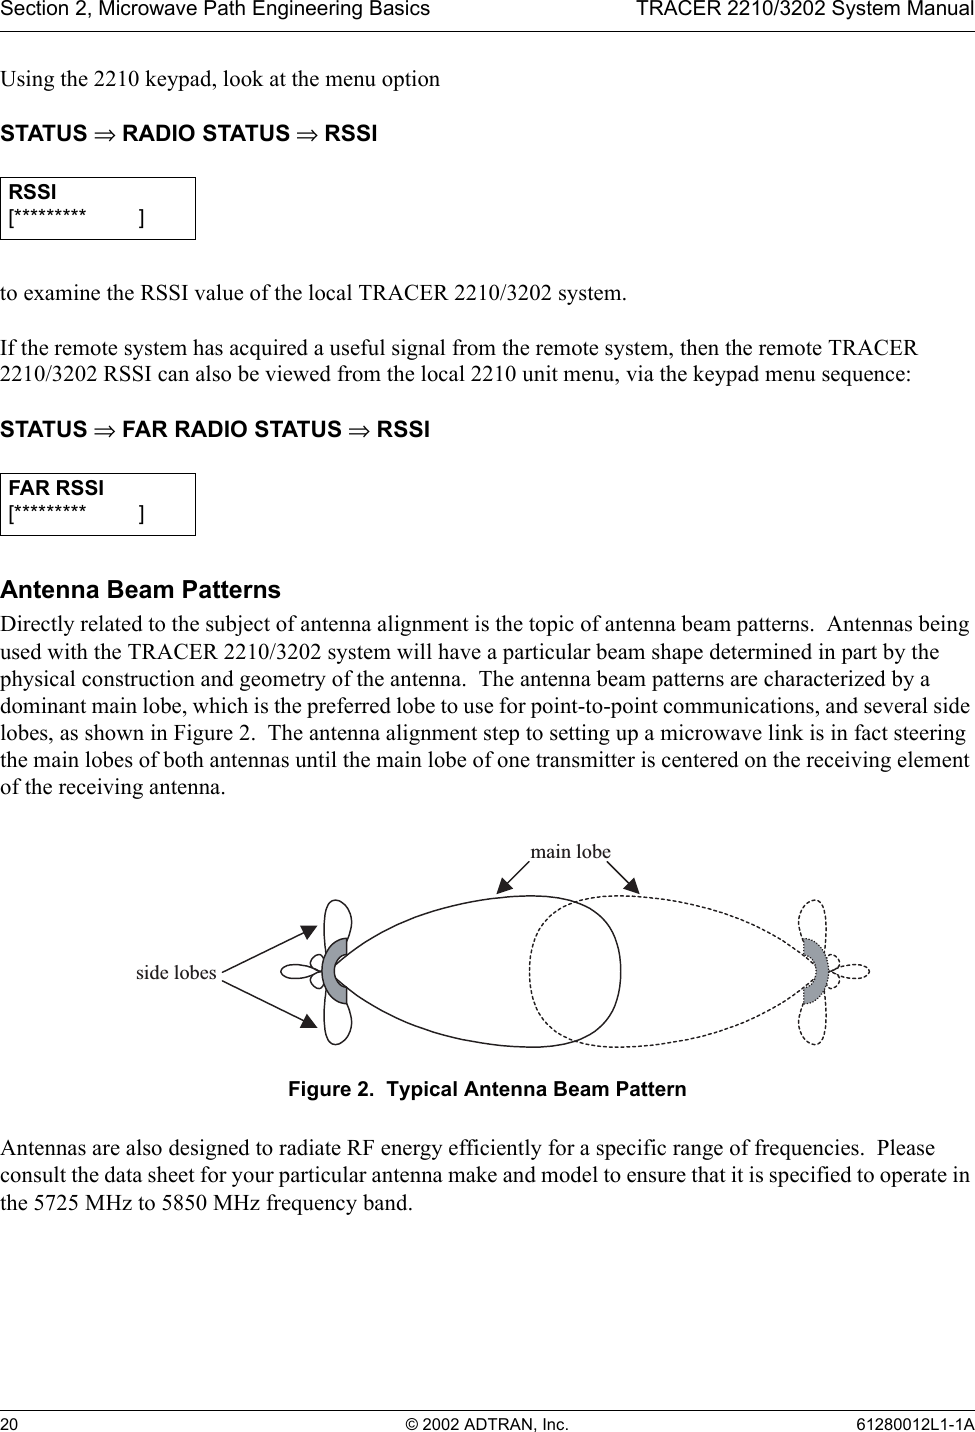 Section 2, Microwave Path Engineering Basics TRACER 2210/3202 System Manual20 © 2002 ADTRAN, Inc. 61280012L1-1AUsing the 2210 keypad, look at the menu optionSTATUS ⇒ RADIO STATUS ⇒ RSSIto examine the RSSI value of the local TRACER 2210/3202 system.  If the remote system has acquired a useful signal from the remote system, then the remote TRACER 2210/3202 RSSI can also be viewed from the local 2210 unit menu, via the keypad menu sequence:STATUS ⇒ FAR RADIO STATUS ⇒ RSSIAntenna Beam PatternsDirectly related to the subject of antenna alignment is the topic of antenna beam patterns.  Antennas being used with the TRACER 2210/3202 system will have a particular beam shape determined in part by the physical construction and geometry of the antenna.  The antenna beam patterns are characterized by a dominant main lobe, which is the preferred lobe to use for point-to-point communications, and several side lobes, as shown in Figure 2.  The antenna alignment step to setting up a microwave link is in fact steering the main lobes of both antennas until the main lobe of one transmitter is centered on the receiving element of the receiving antenna.Figure 2.  Typical Antenna Beam PatternAntennas are also designed to radiate RF energy efficiently for a specific range of frequencies.  Please consult the data sheet for your particular antenna make and model to ensure that it is specified to operate in the 5725 MHz to 5850 MHz frequency band.RSSI[********* ____]FAR RSSI[********* ____]main lobeside lobes